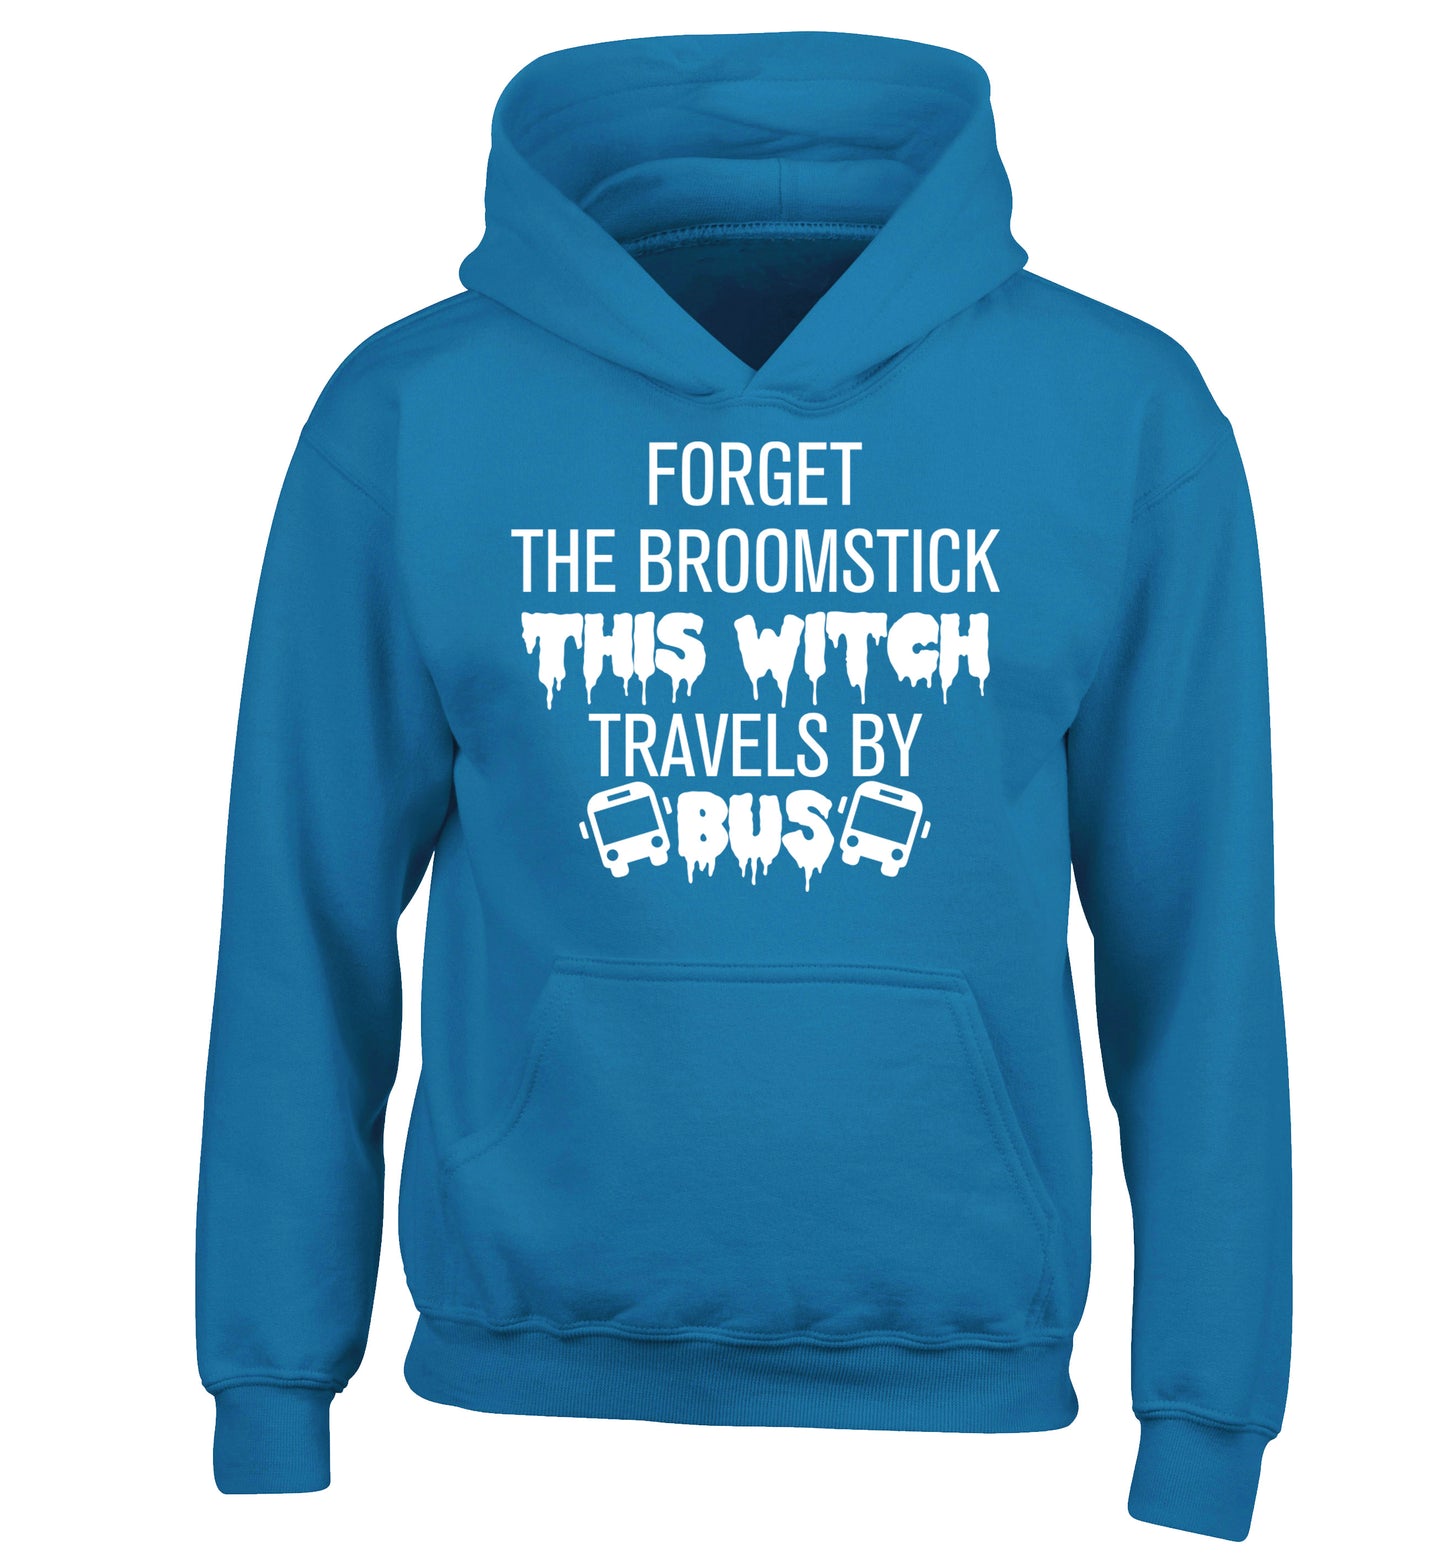 Forget the broomstick this witch travels by bus children's blue hoodie 12-14 Years